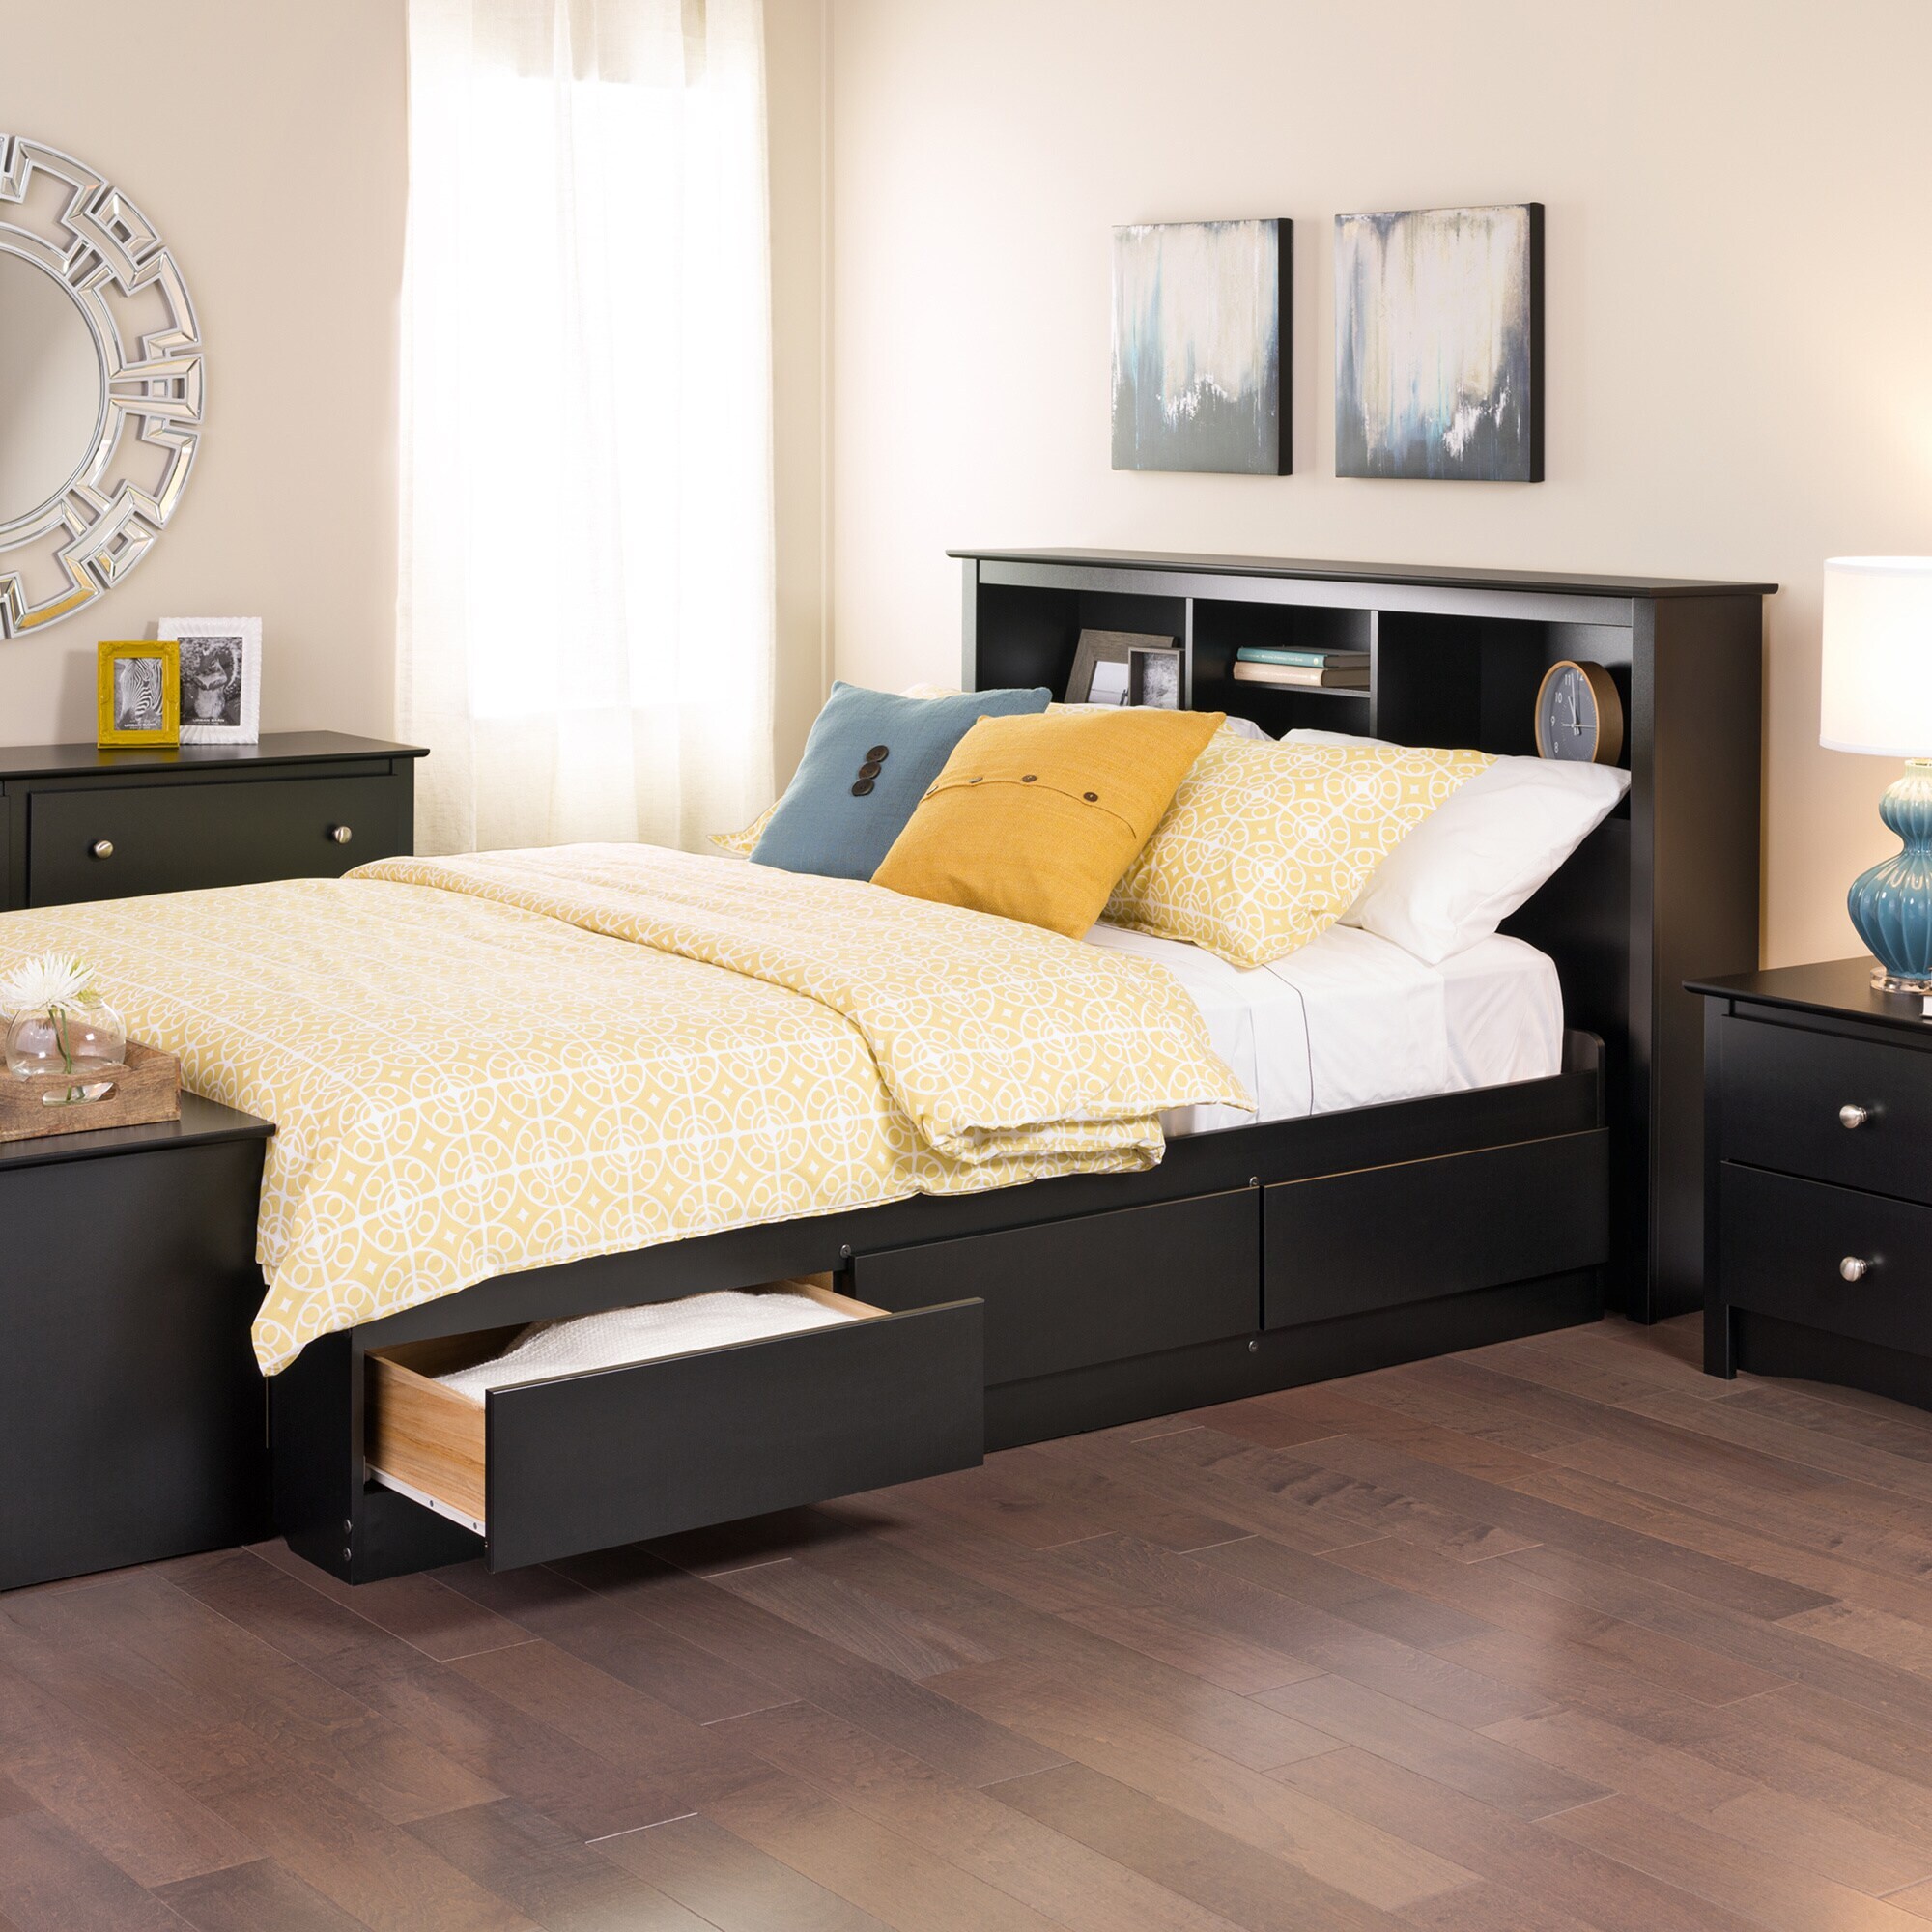 Full size platform bed with drawers